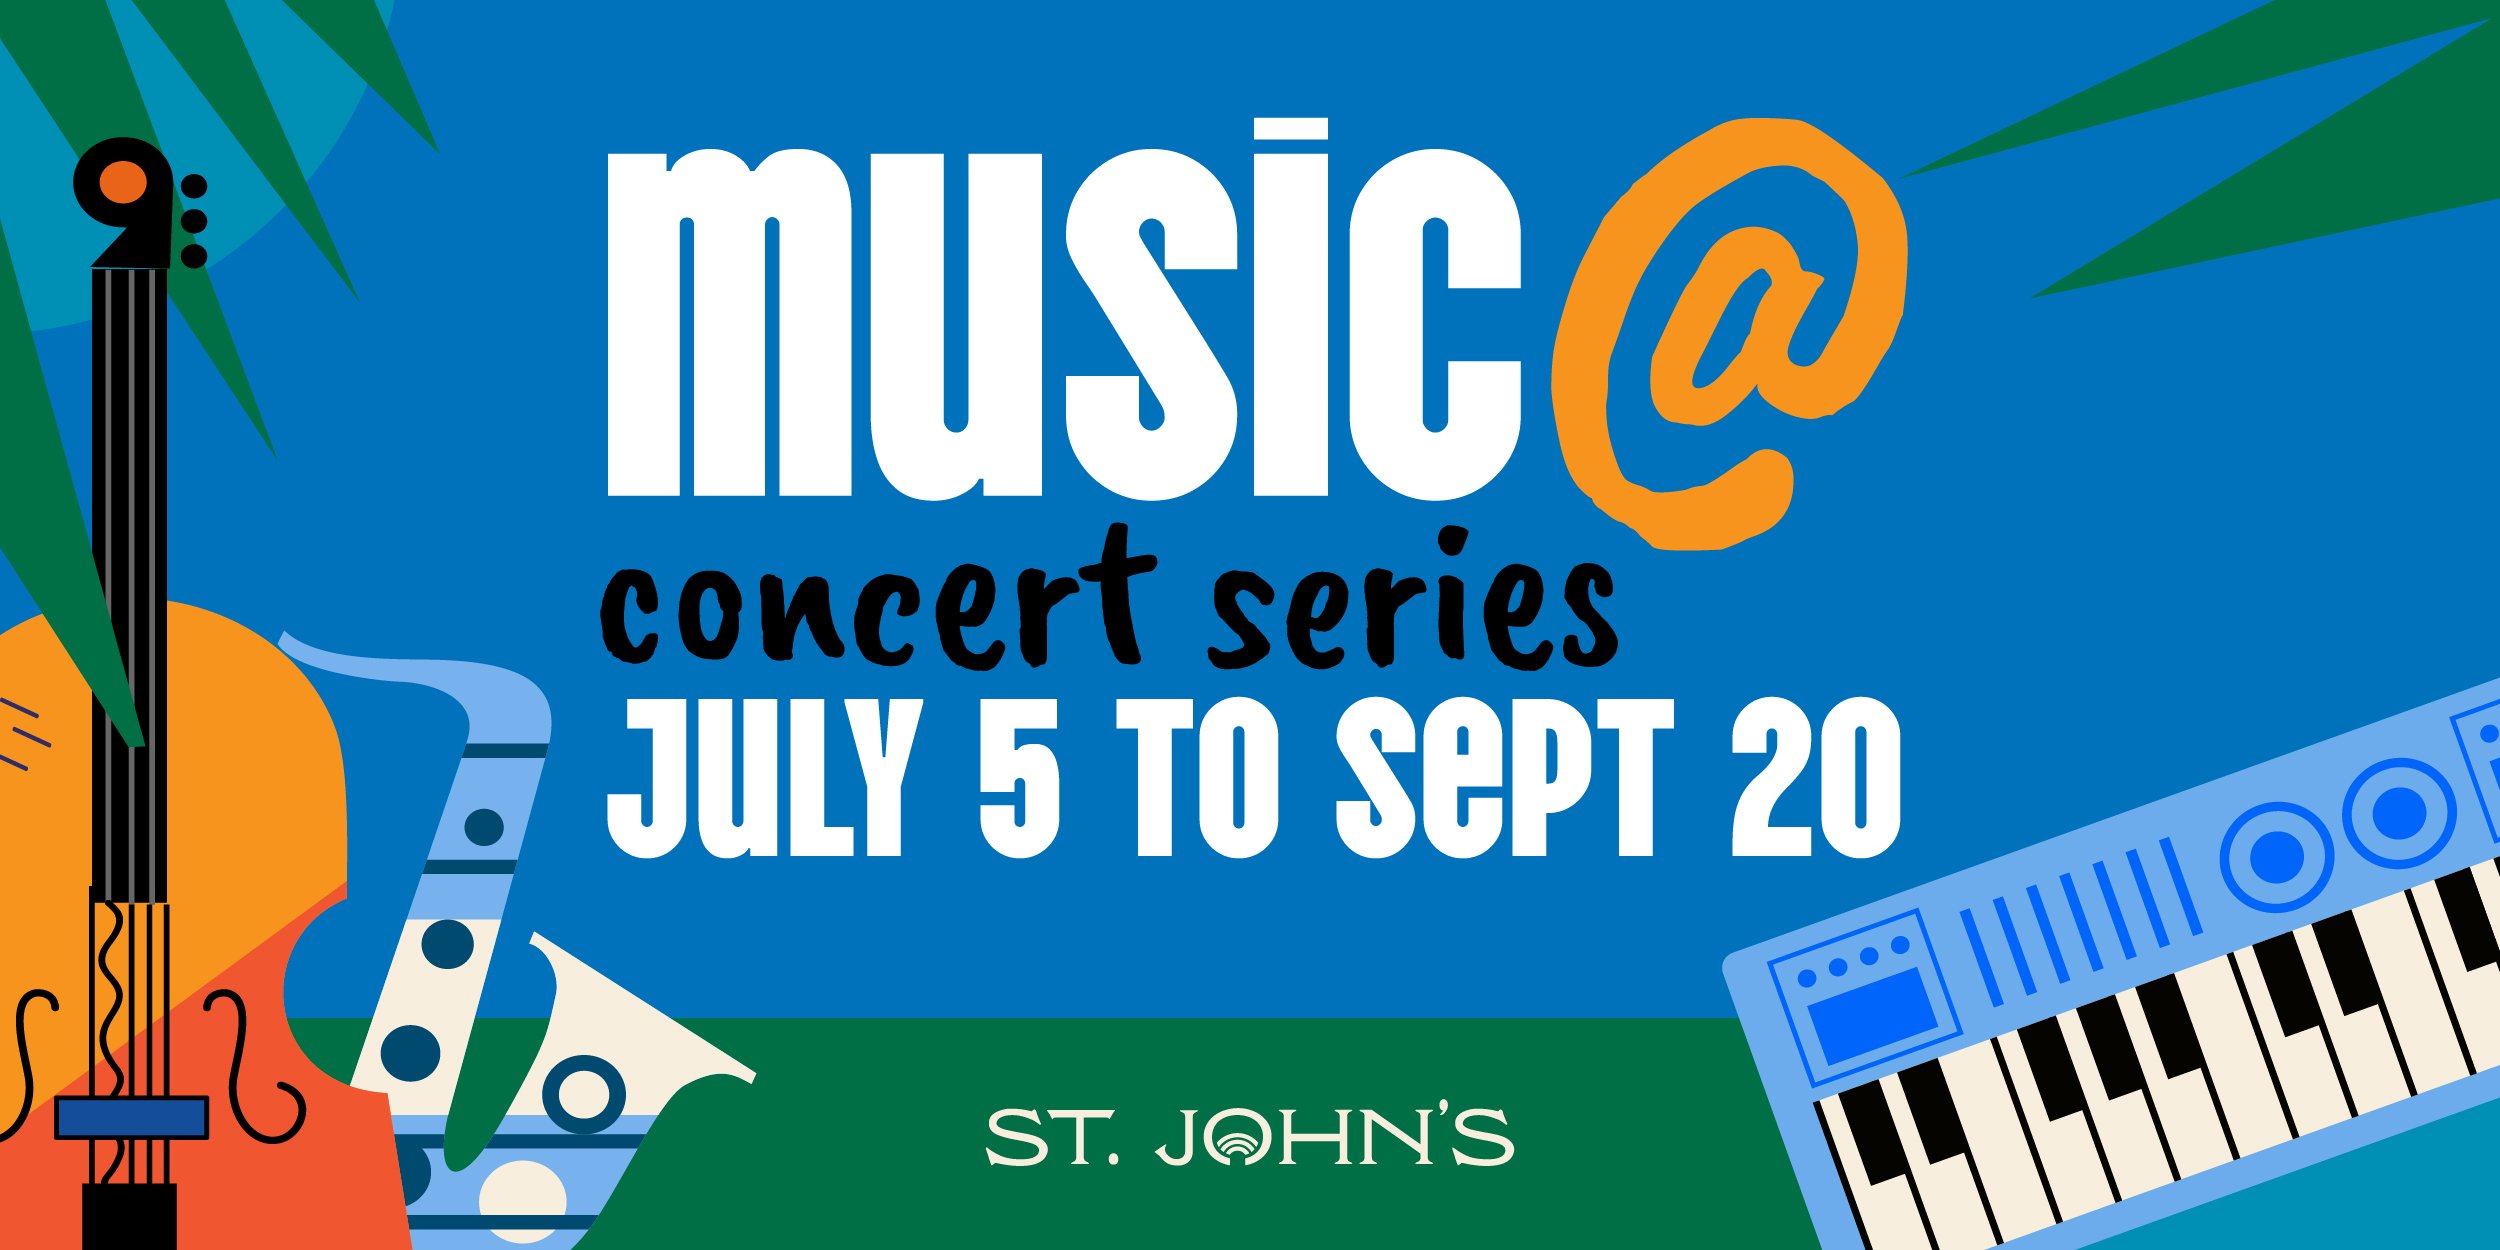 Graphic that says "Music @ concert series July 5 to Sept 20". There are images of musical instruments on the sides.